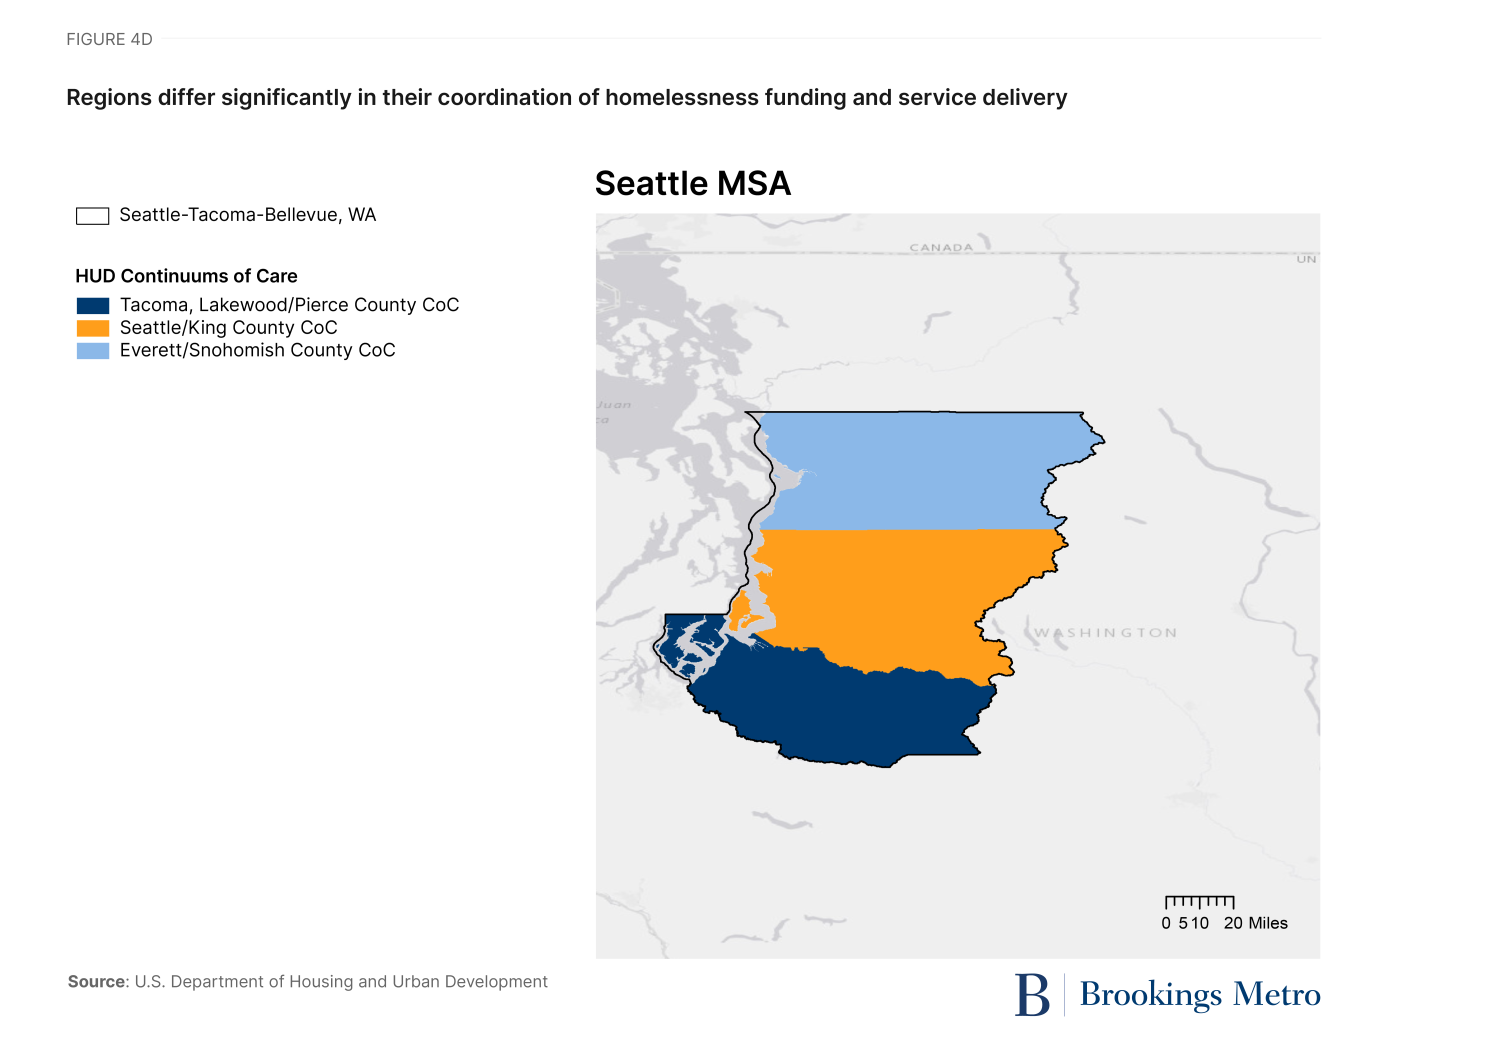 Figure 4. Regions differ significantly in their coordination of homelessness funding and service delivery - Seattle